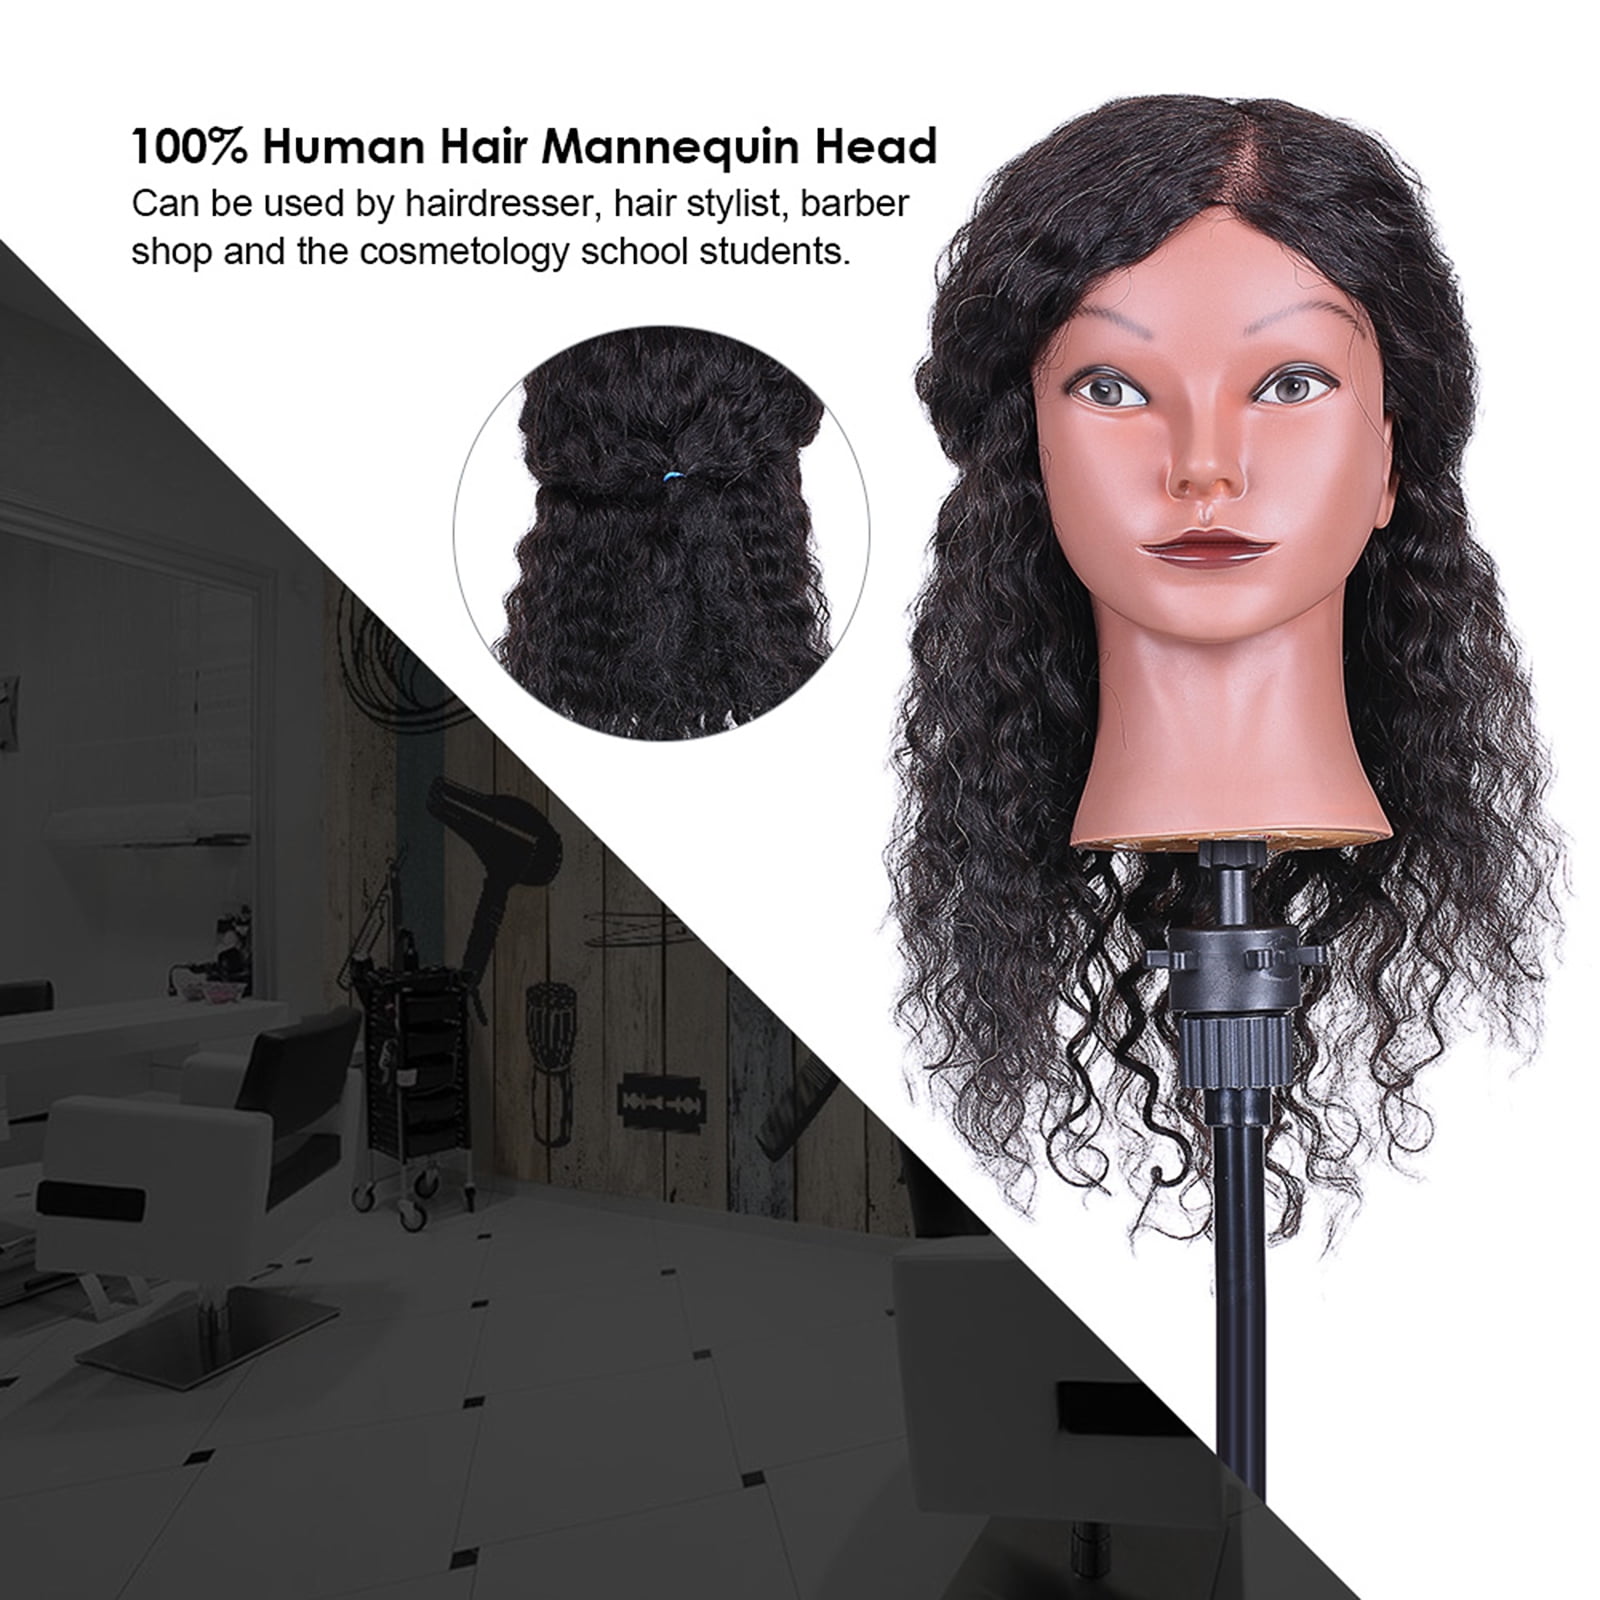 MILLYSHINE 100% Real Human Hair Mannequin Head for Braiding, Styling, Curling, Dyeing - 16 Hairdresser Practice Training Head